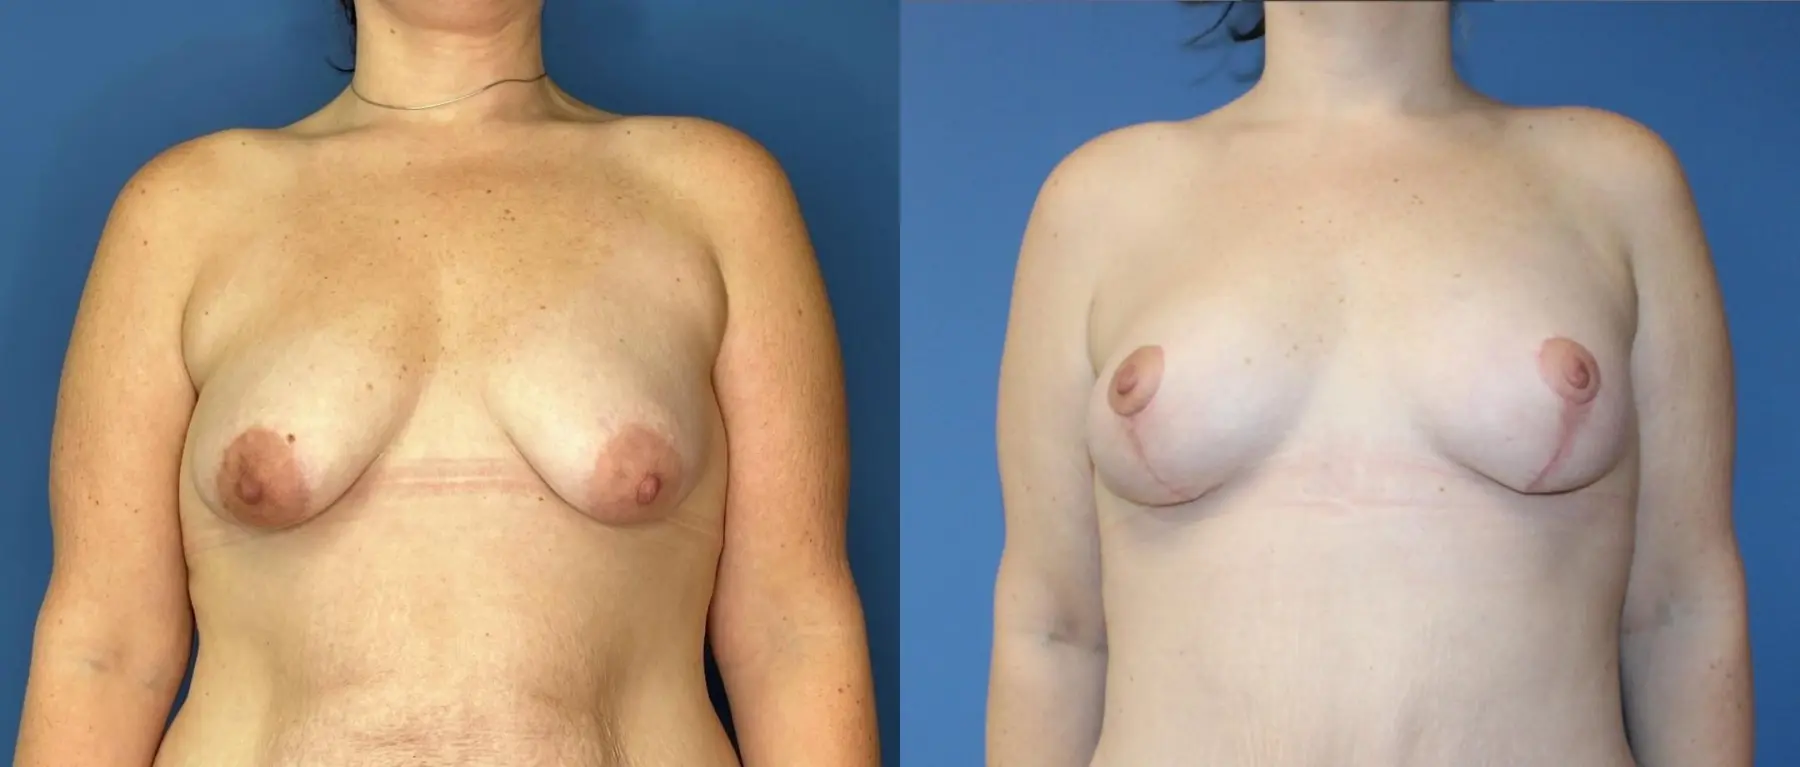 Breast Lift - Fat: Patient 1 - Before and After  